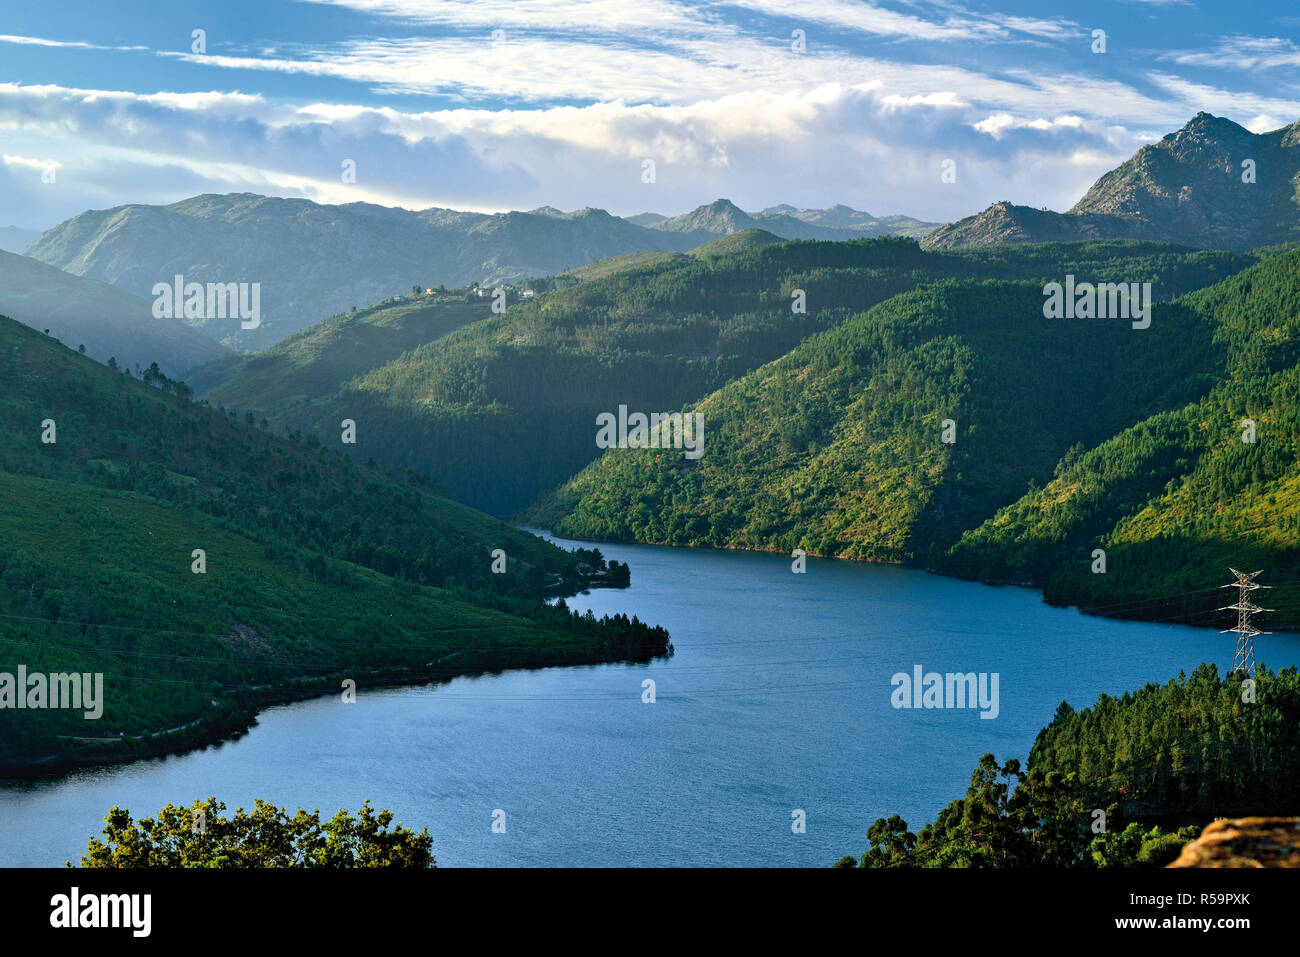 View to idyllic lake surrounded by green mountains with dramatic cloudy sky Stock Photo